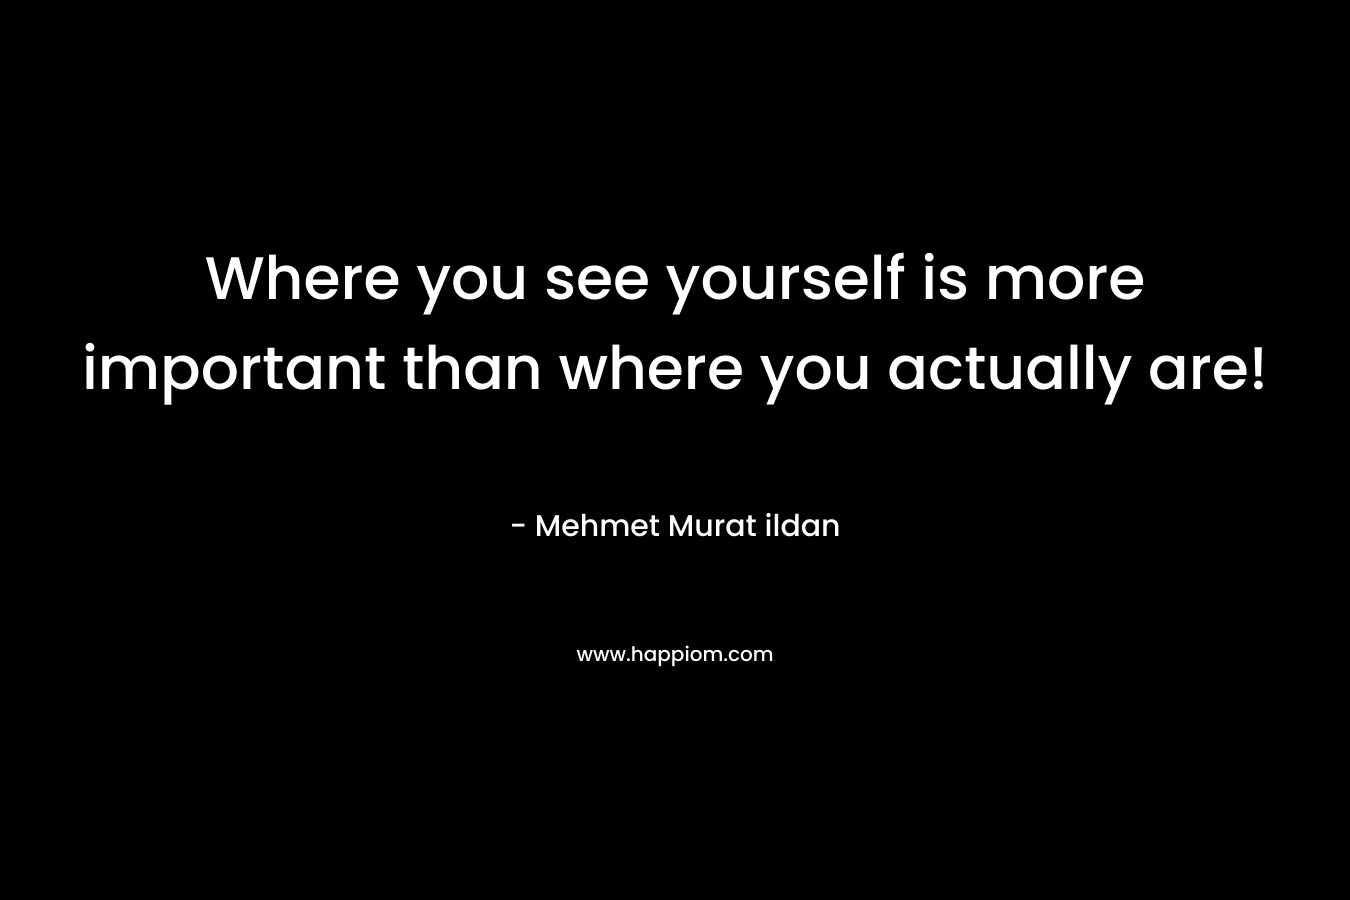 Where you see yourself is more important than where you actually are!